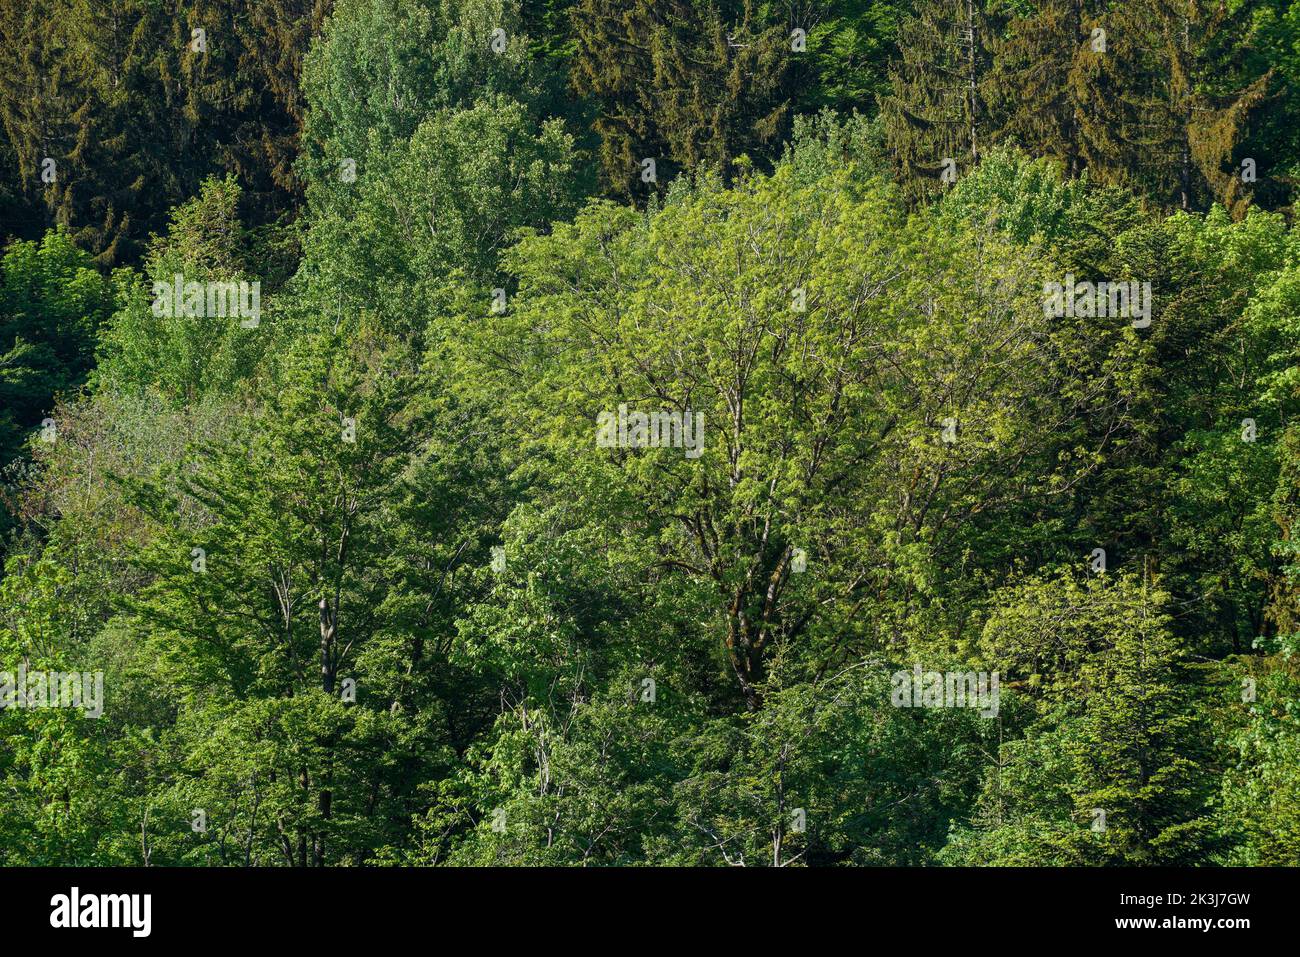 An aerial view of green vegetation trees in the forest Stock Photo